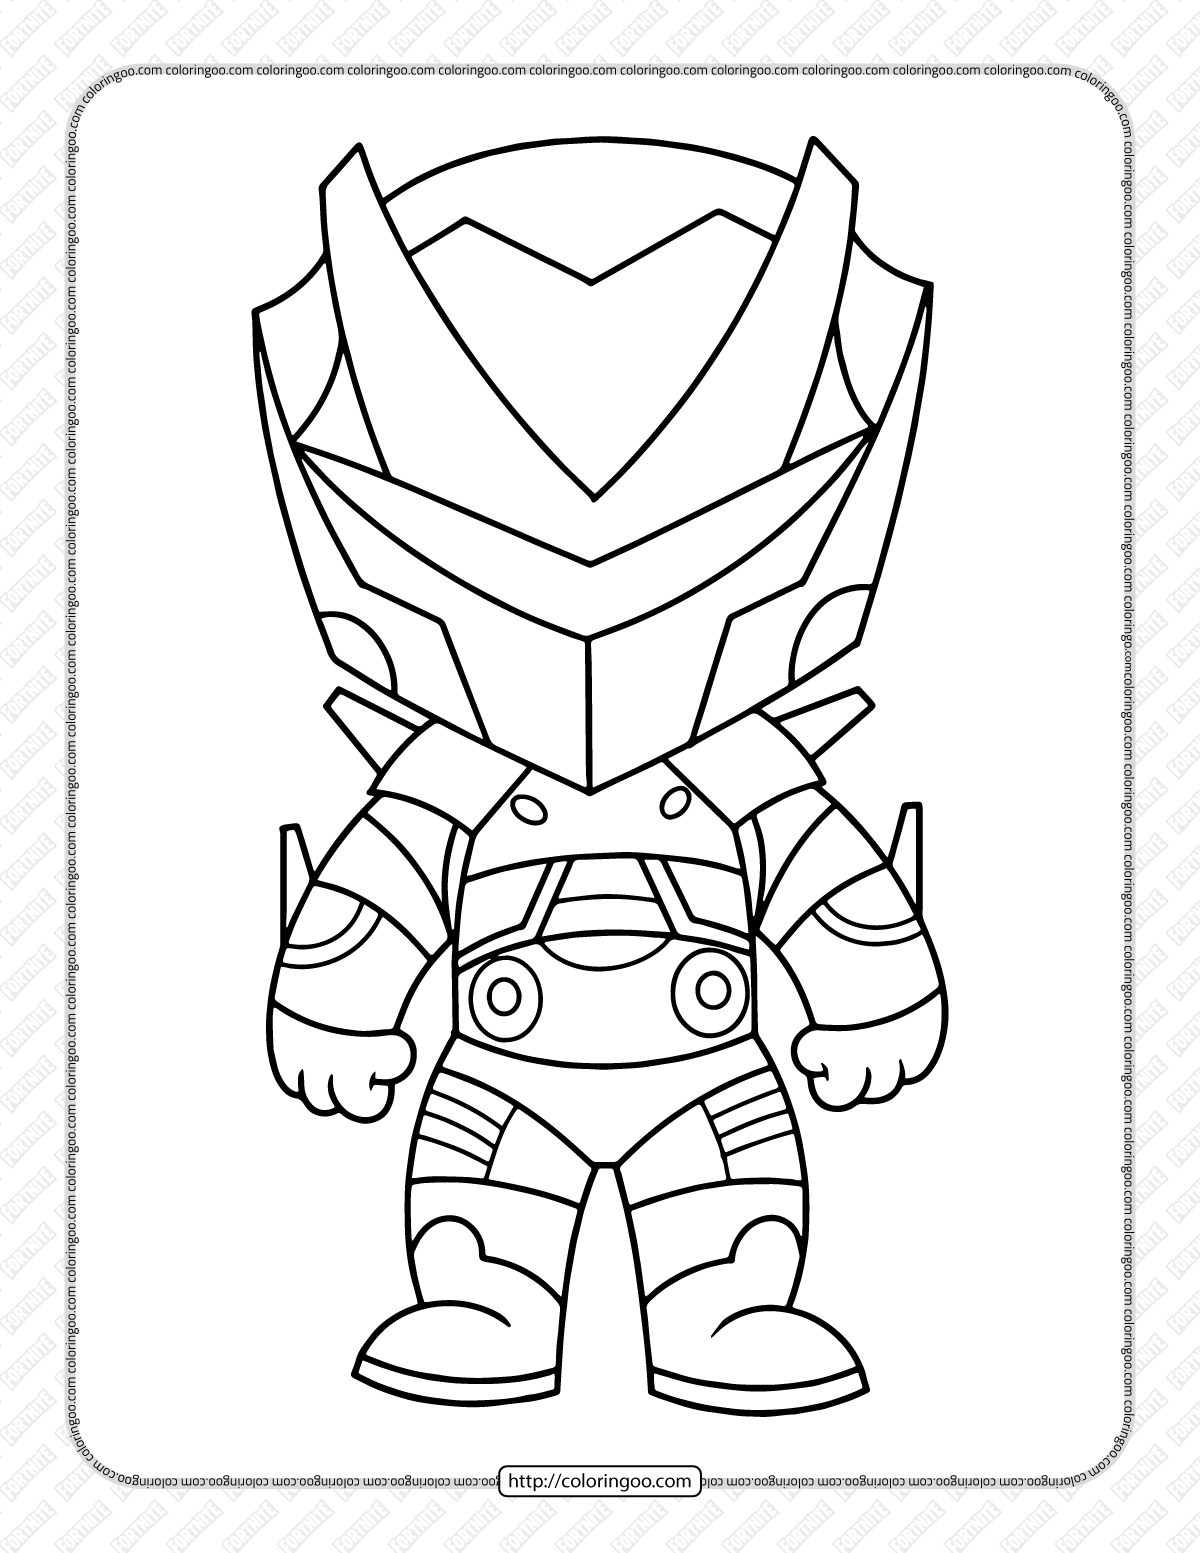 chibi fortnite coloring pages 25